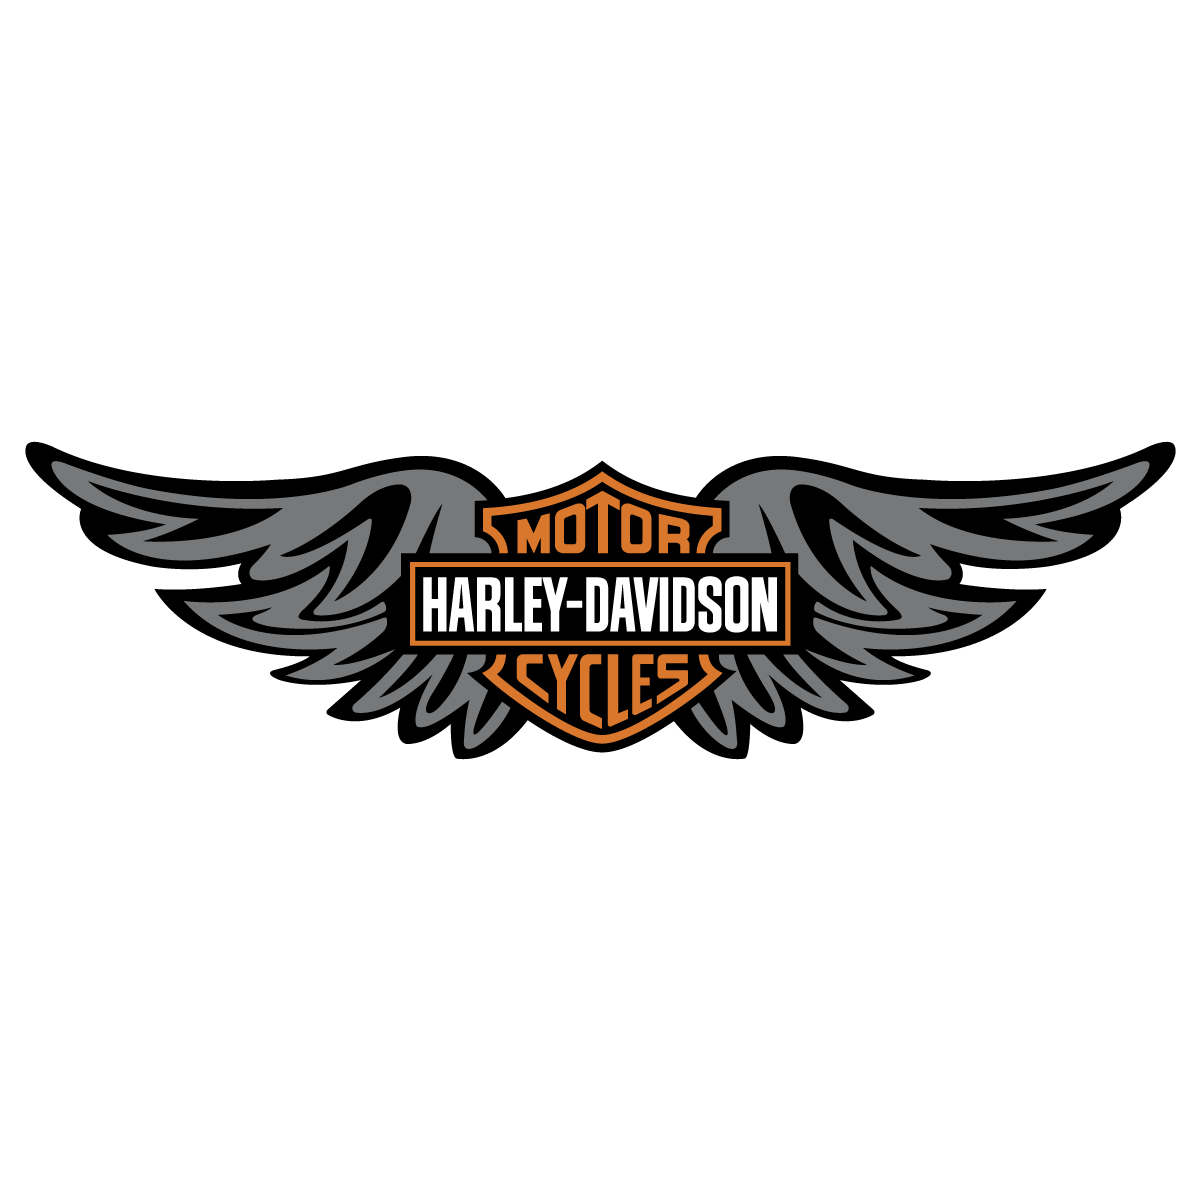 Wing clipart vector. Harley davidson logo silhouette